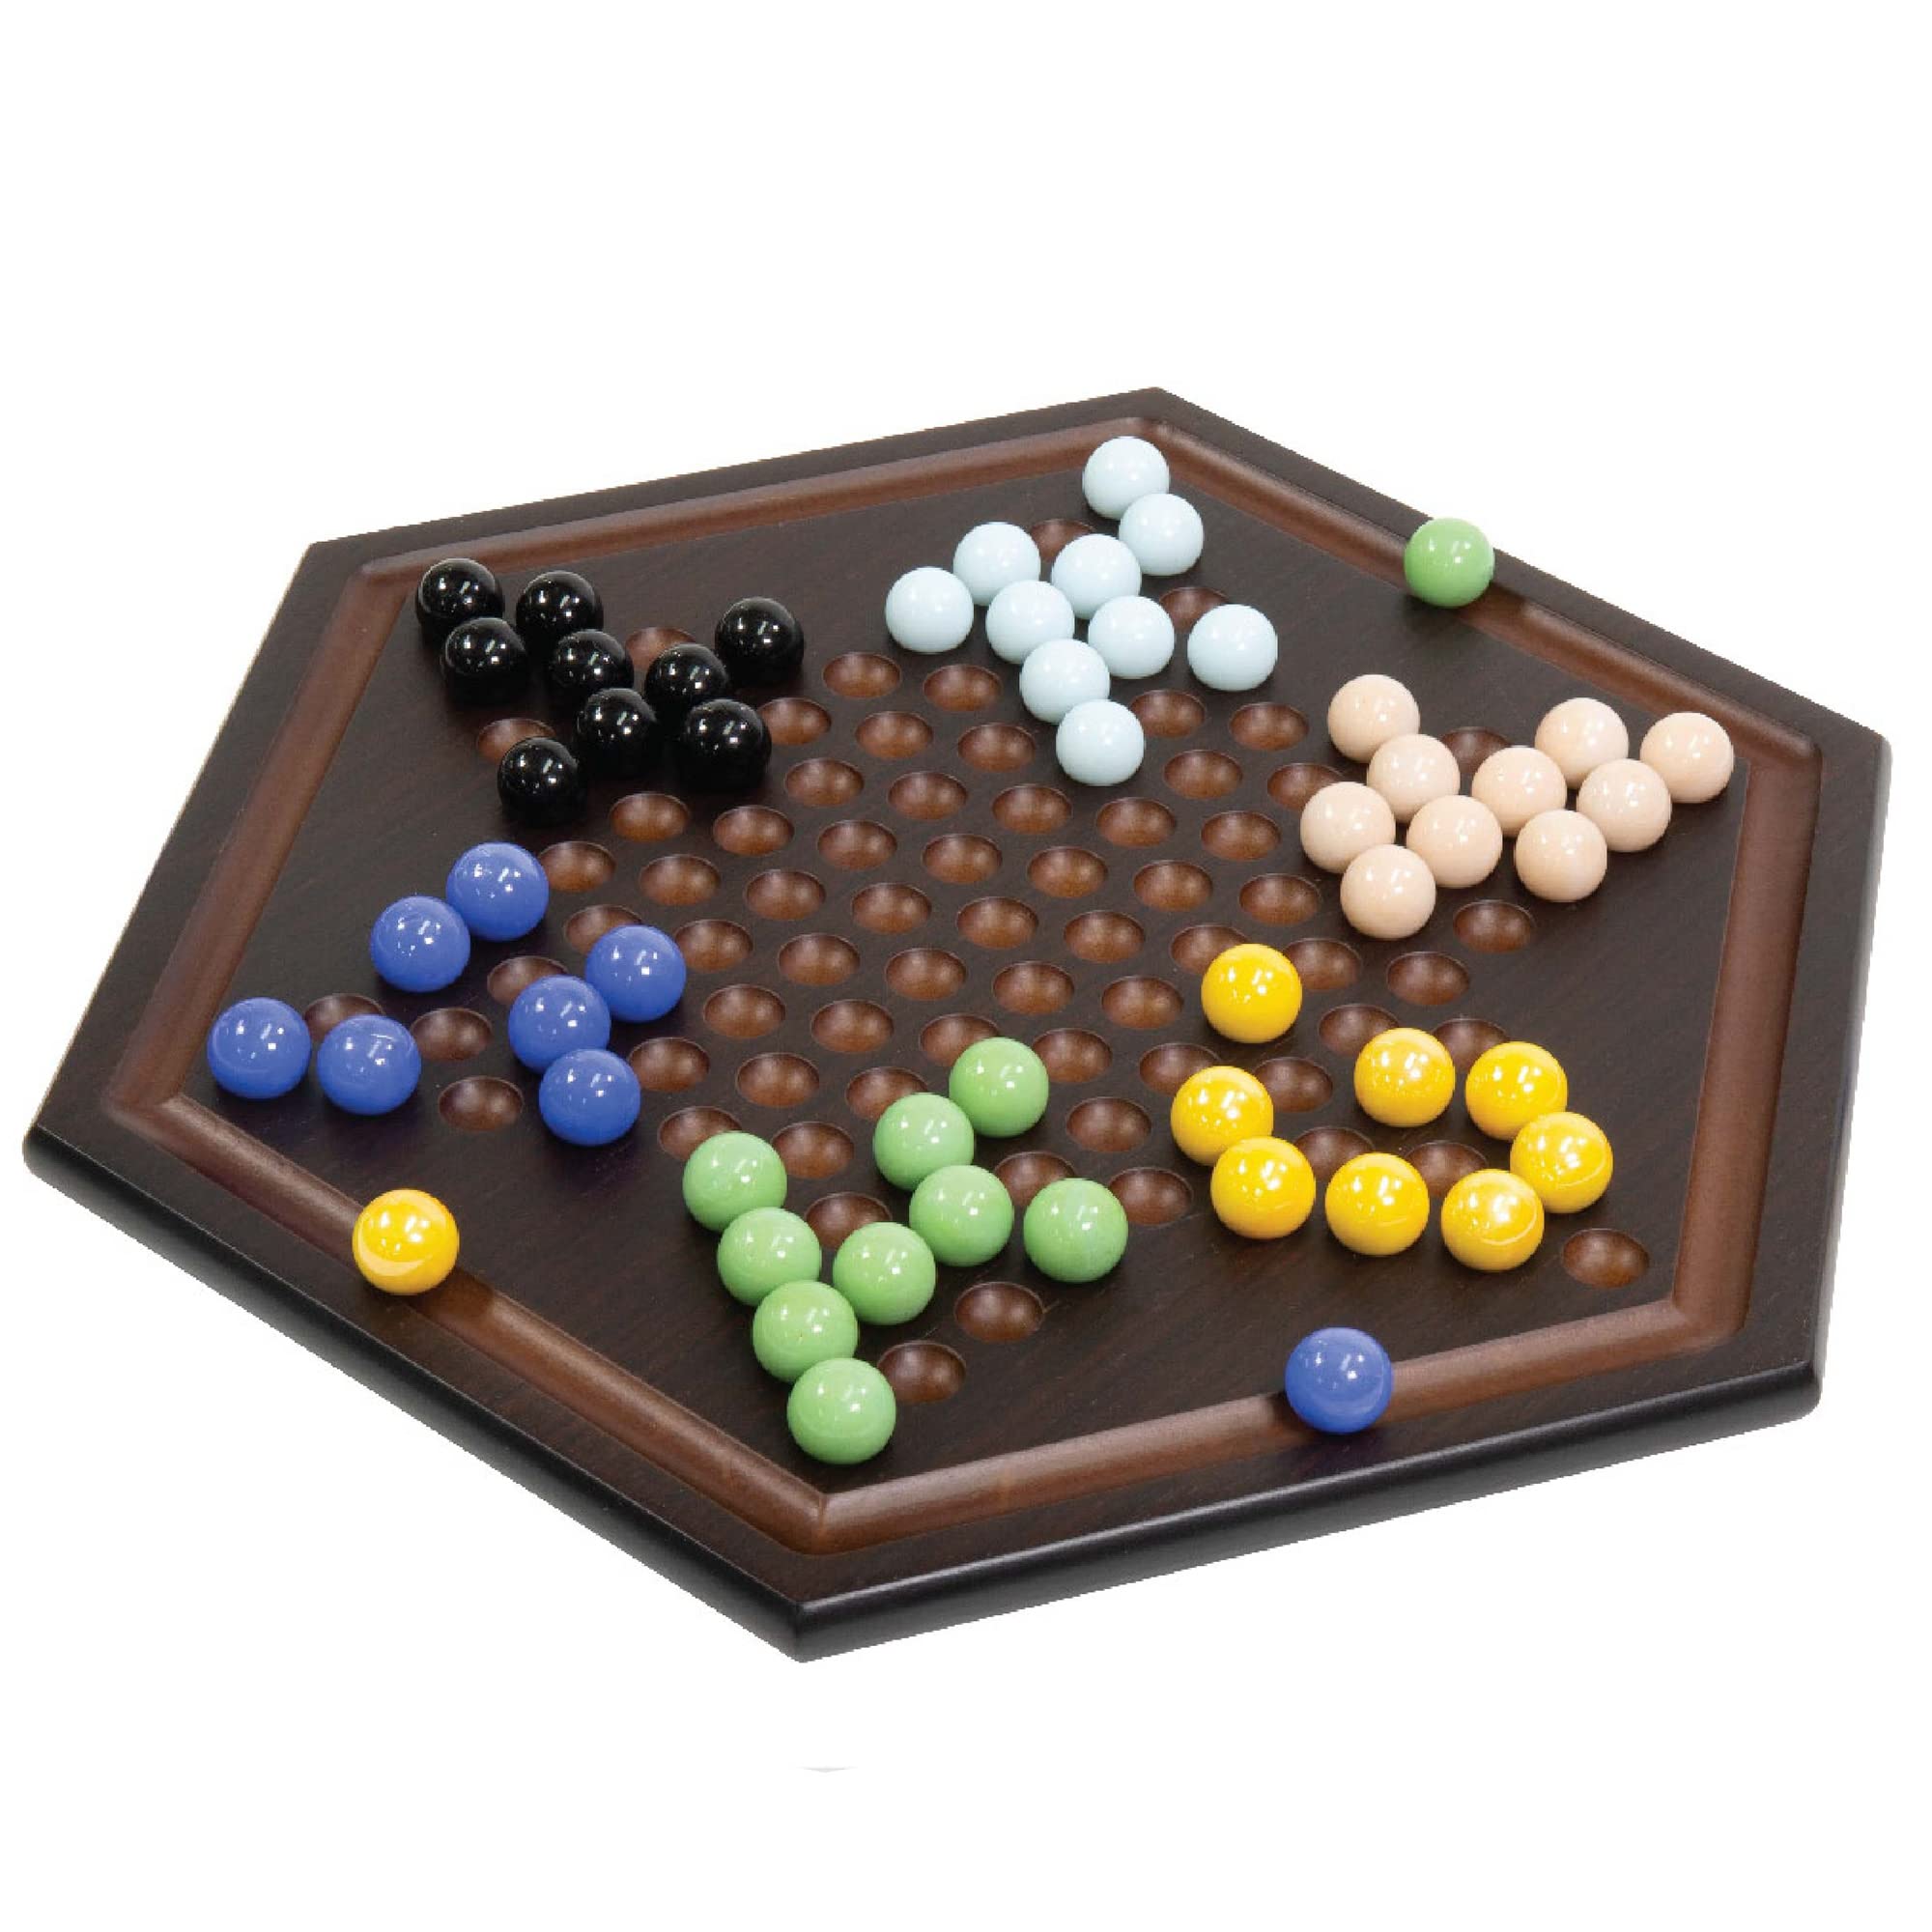 Craftsman Deluxe Chinese Checkers Set